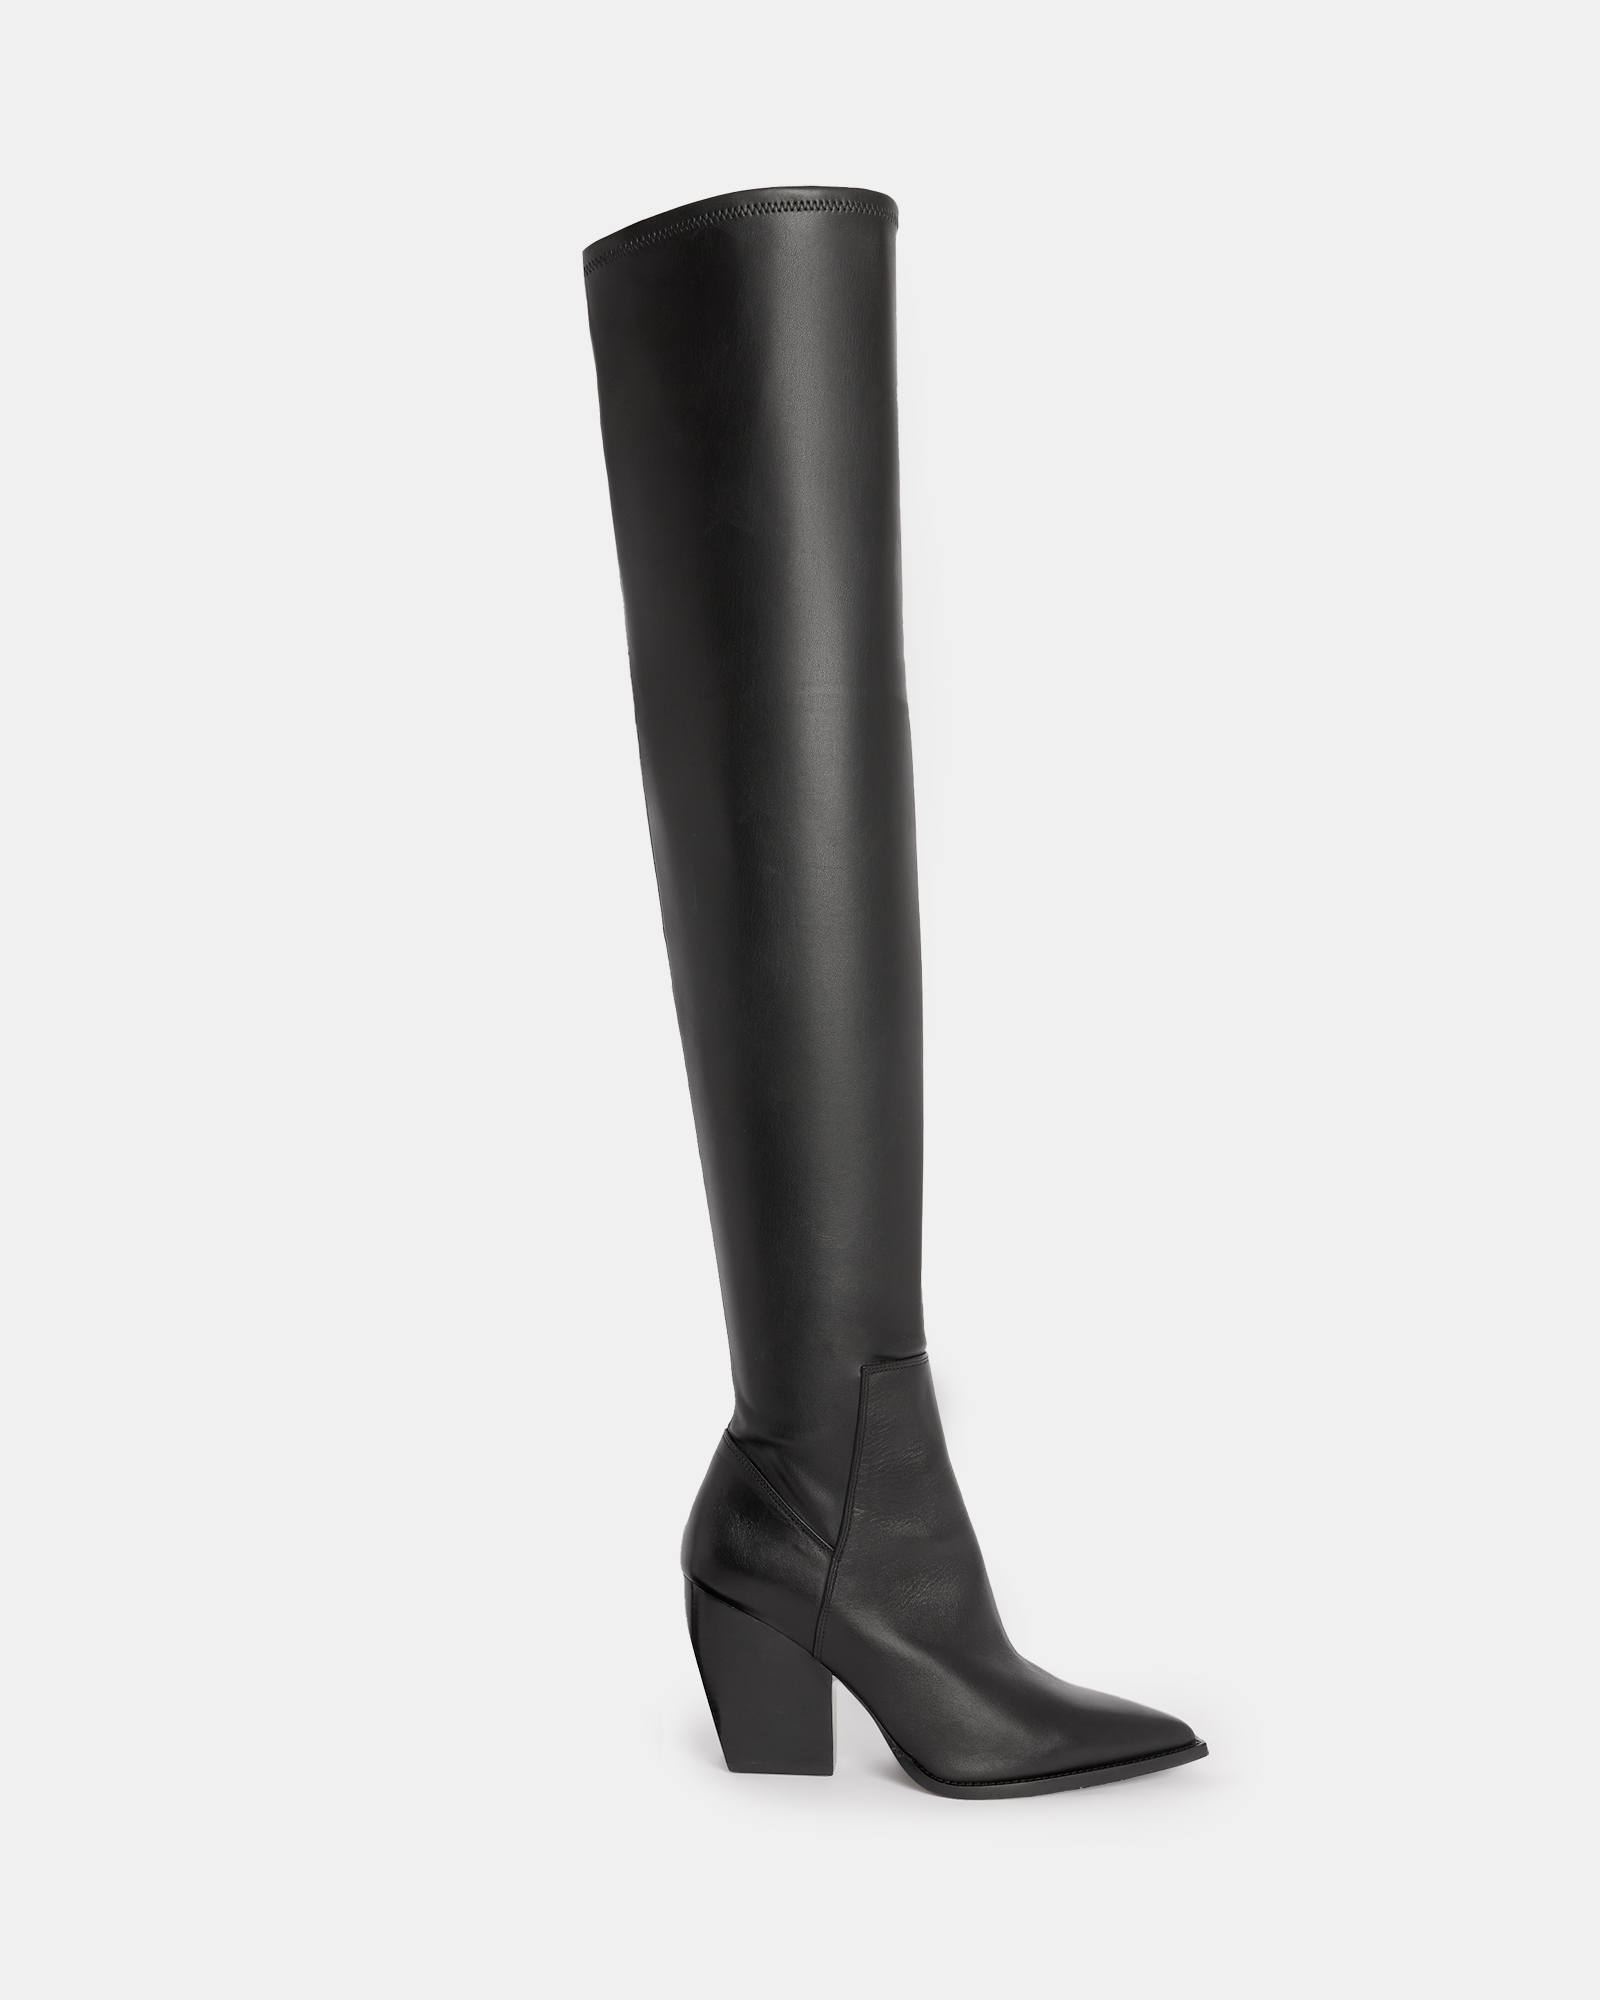 AllSaints Lara Stretchy Over The Knee Boots